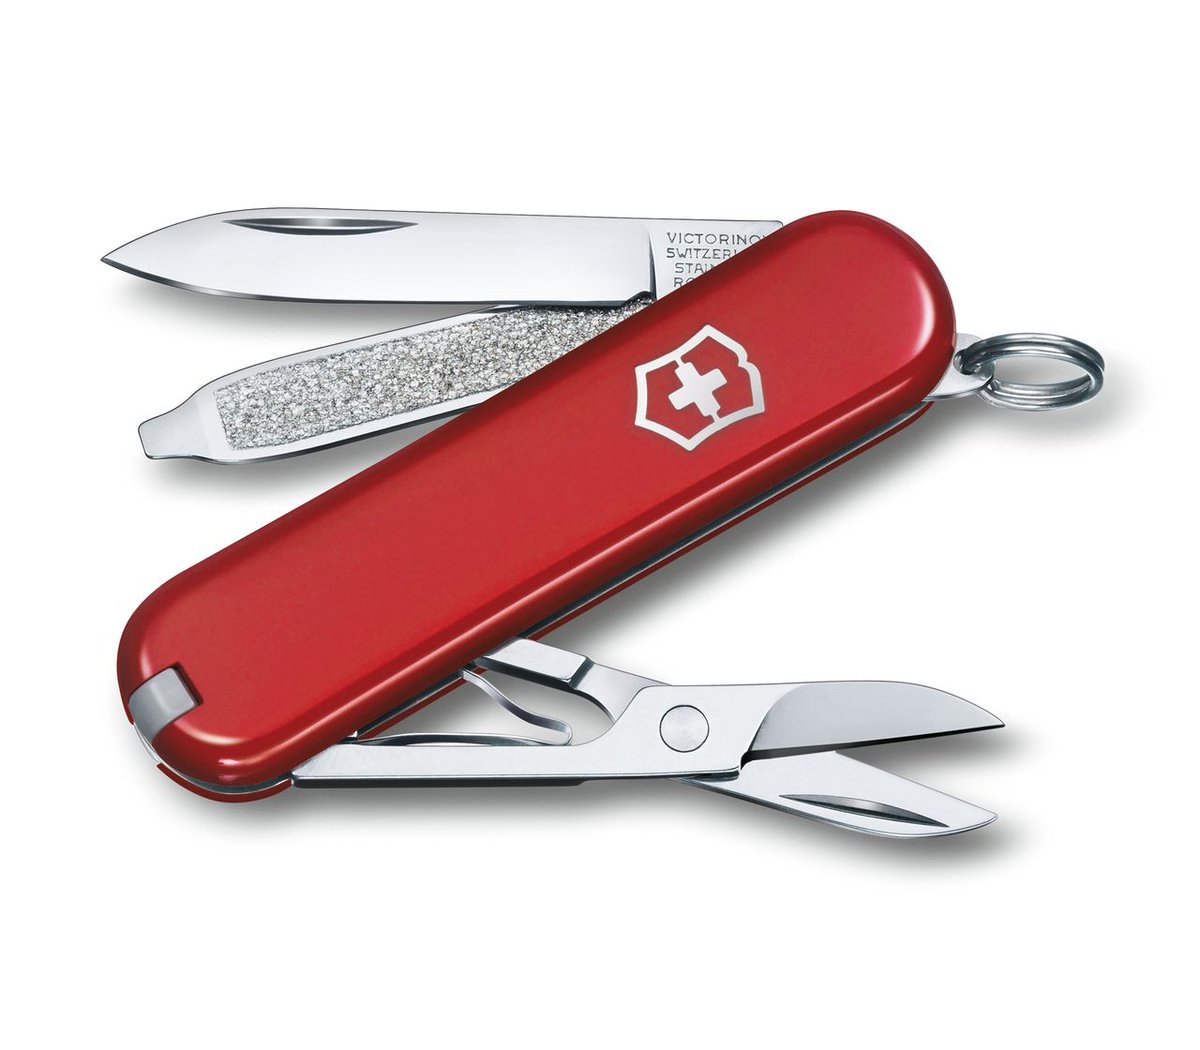 7. Bill – Swiss Army KnifeUseful. More than just a knife. Built to help you face life’s biggest challenges, if you haven’t lost it along the way.